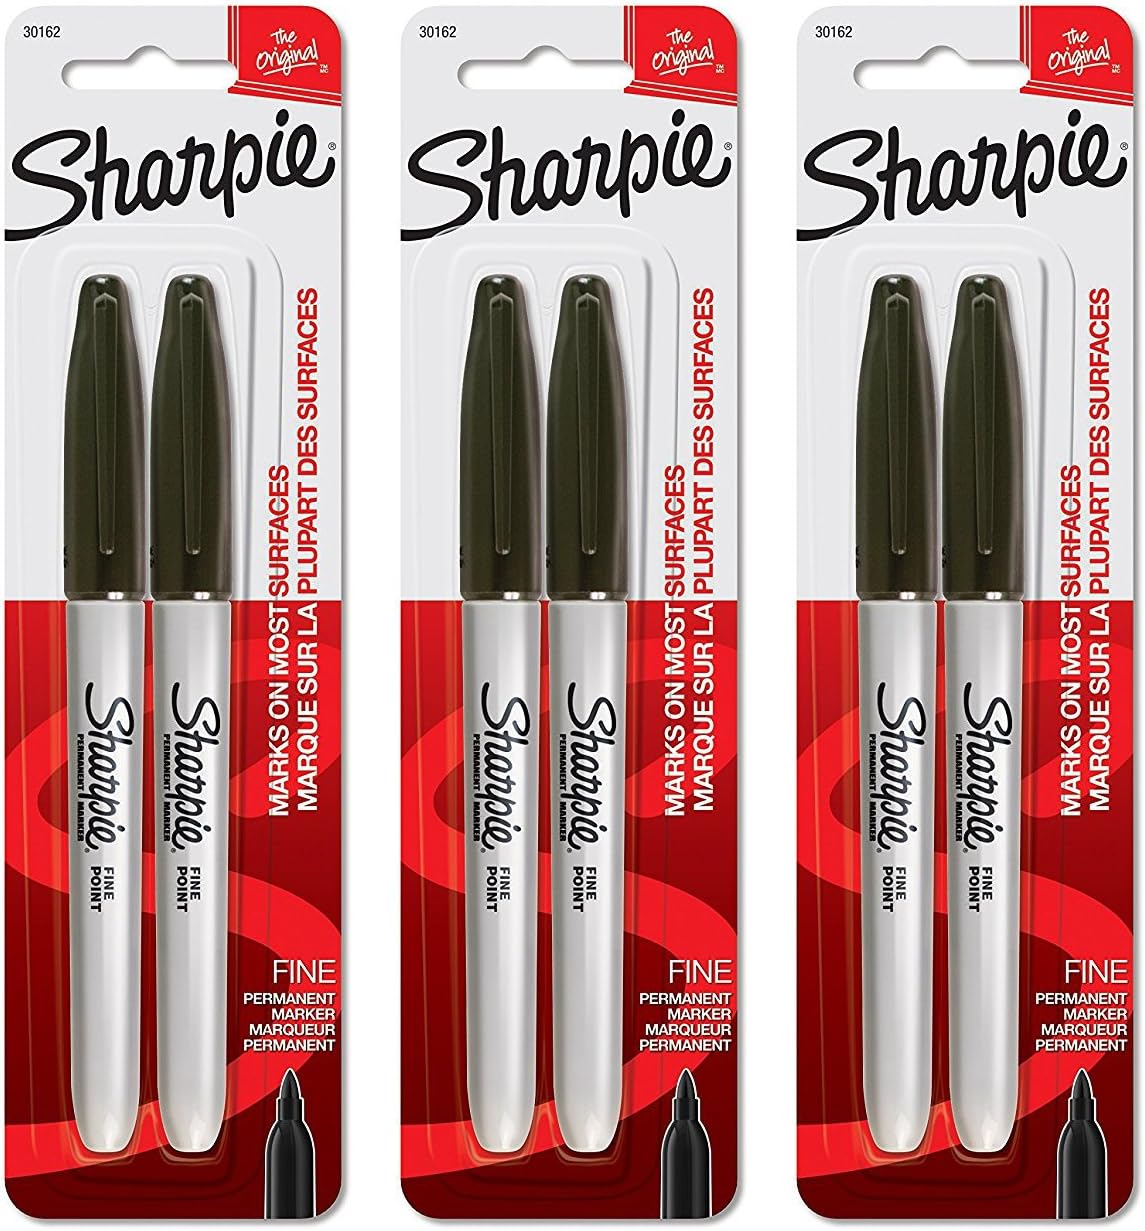 Sharpie Fine Point Permanent Markers Pack of 2 30162